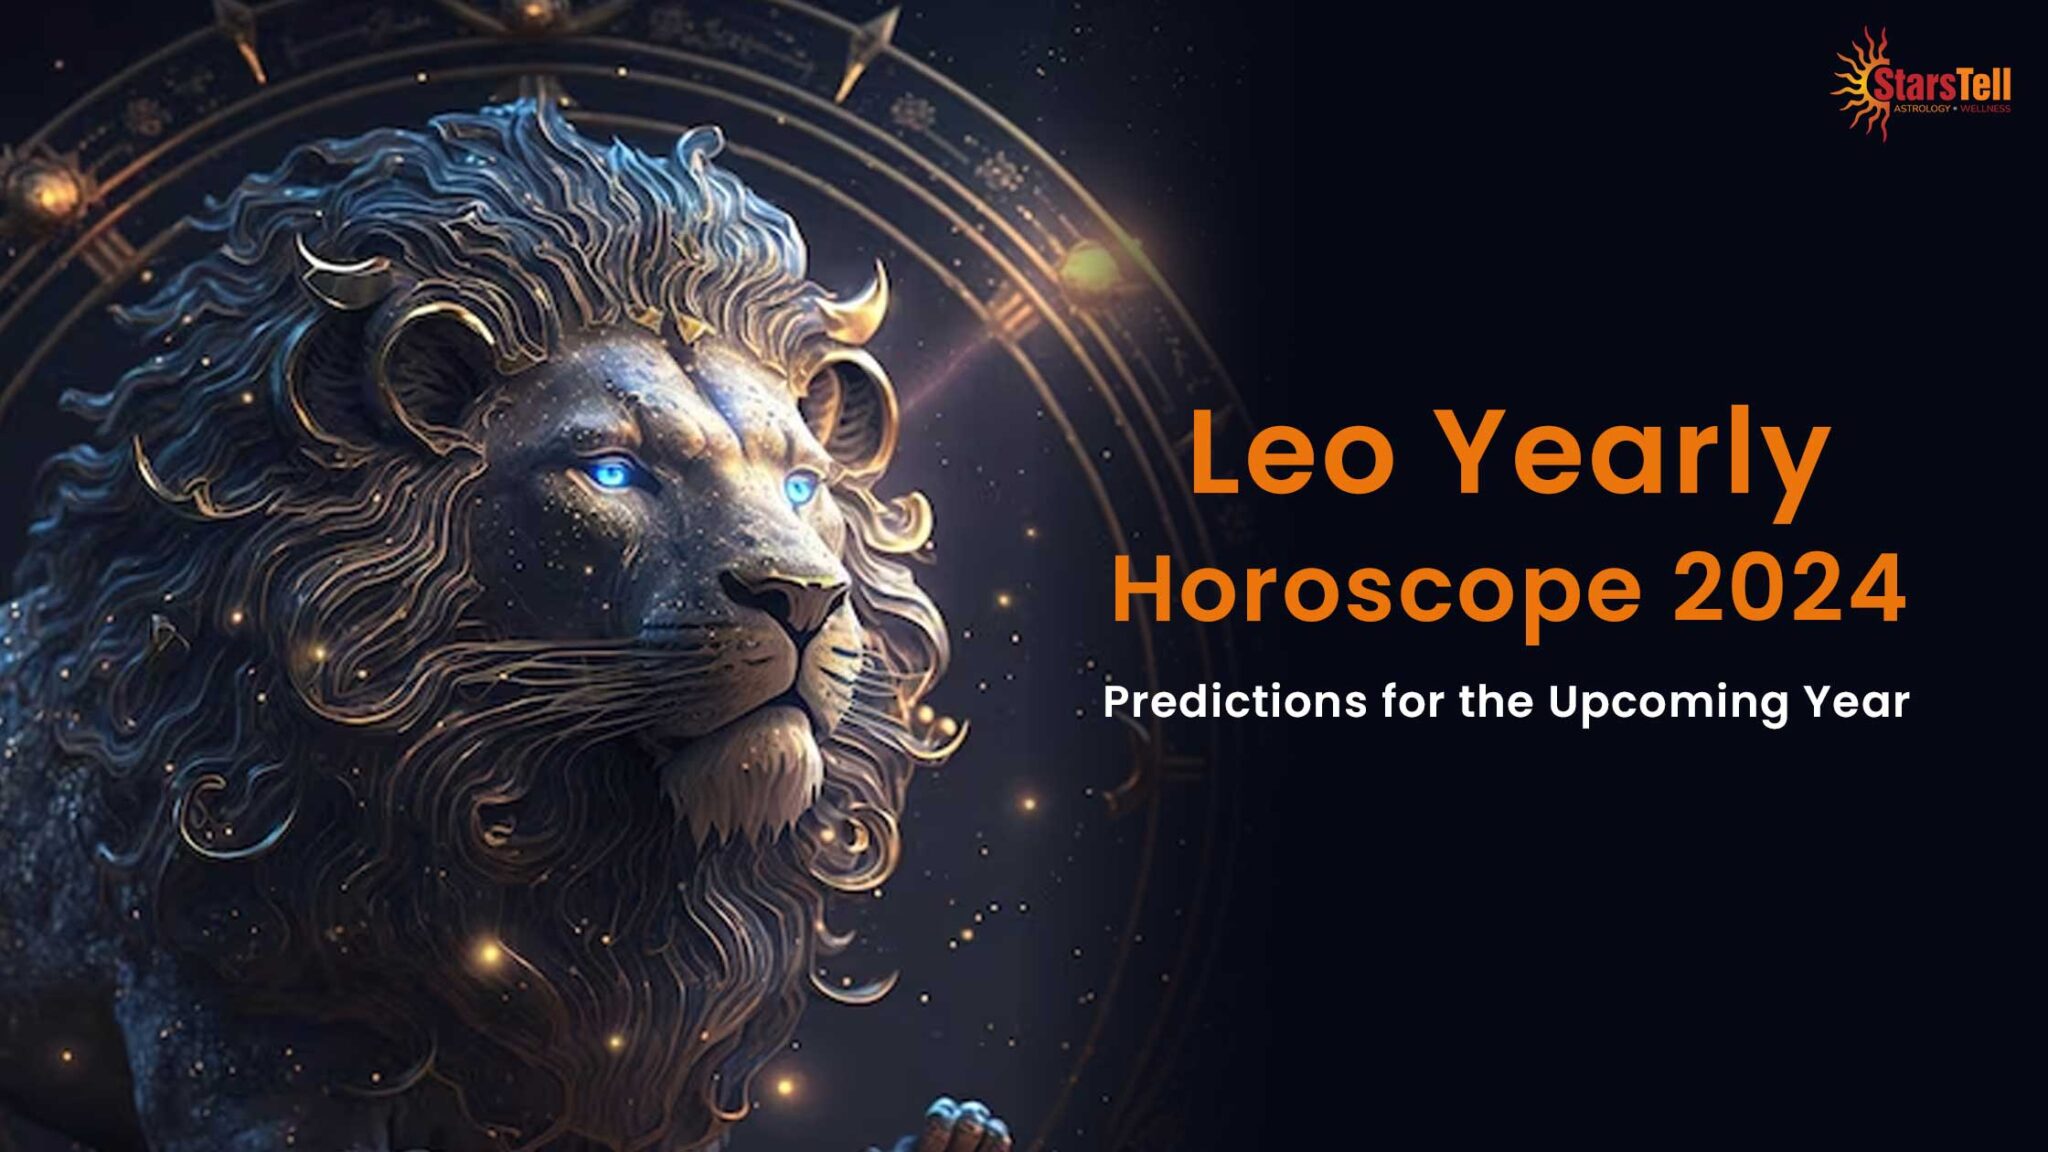 Leo Yearly Horoscope 2024 Predictions for the Year